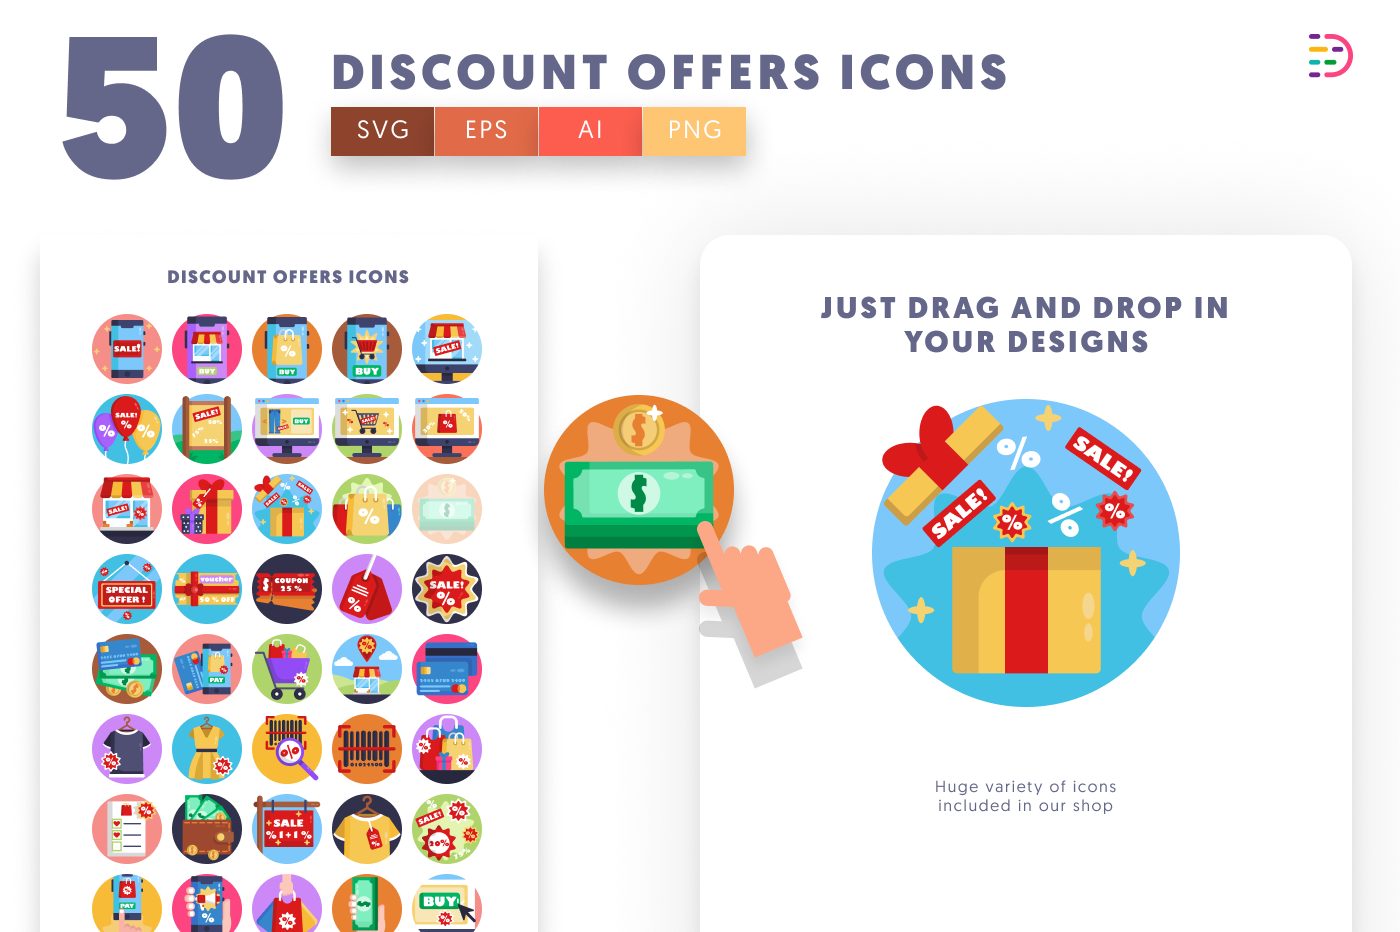 Eye-catching Discount and Sales Offers Icons to help drive sales and increase conversions